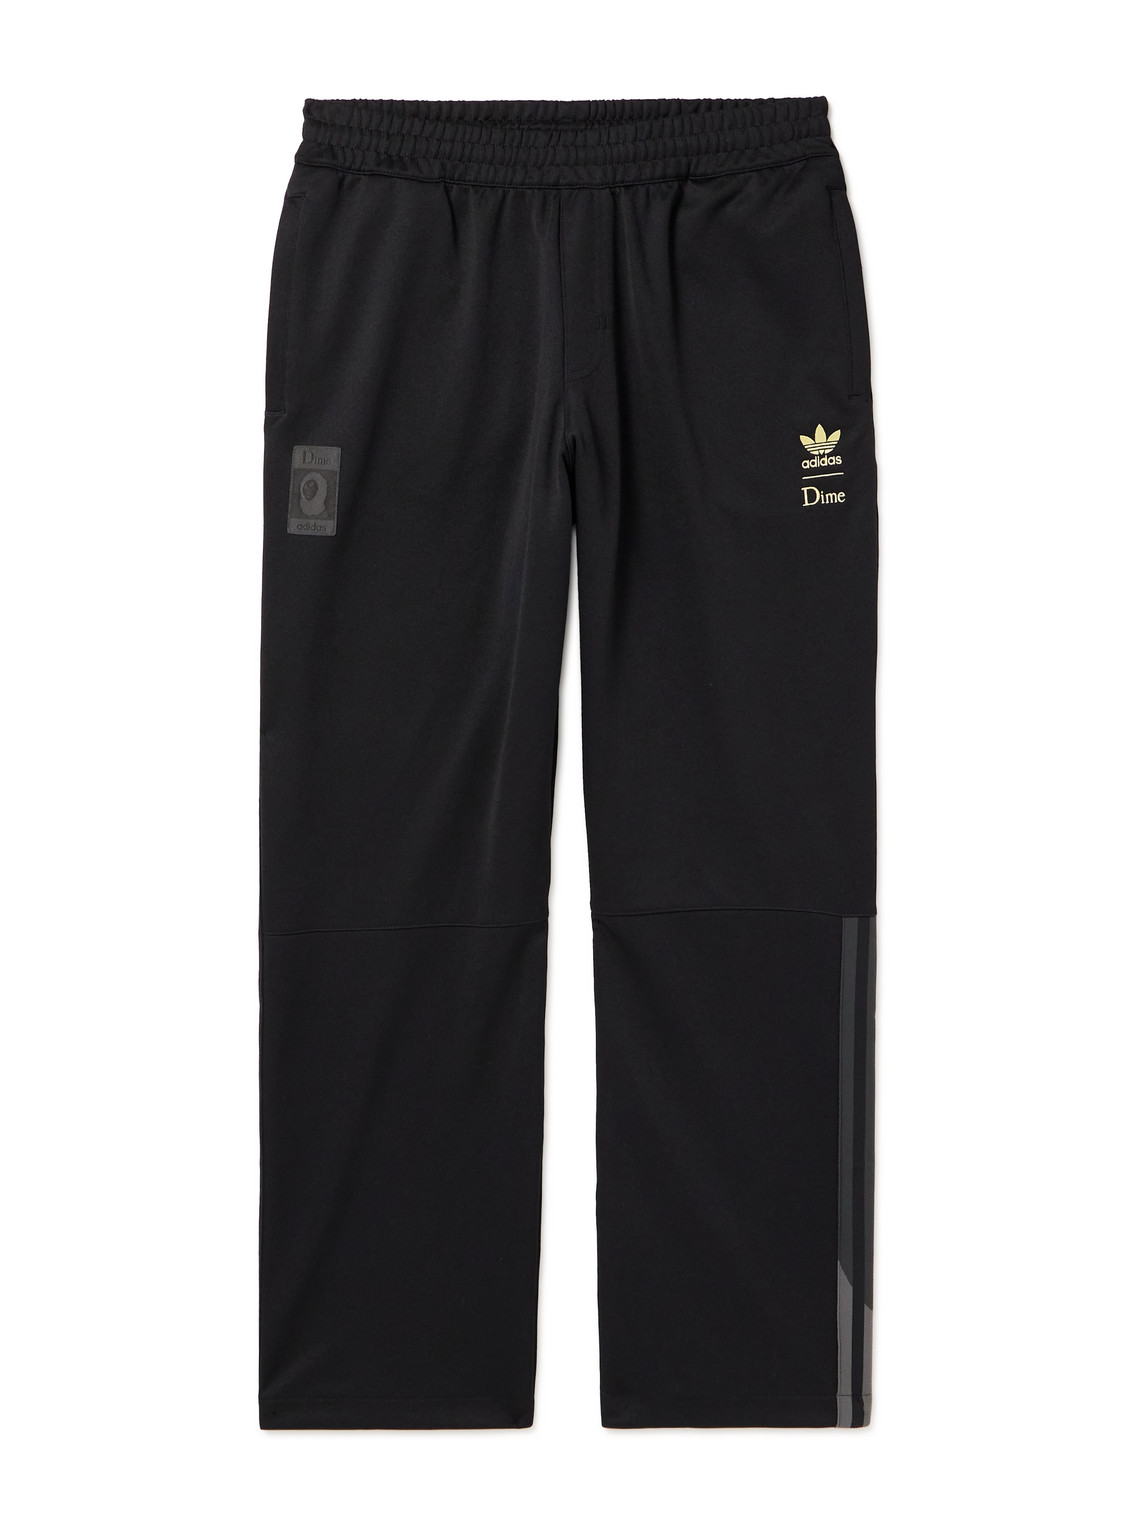 Adidas DIME Superfire Logo-Emroidered Recycled-Jersey Track Pants - Men -  Black - L